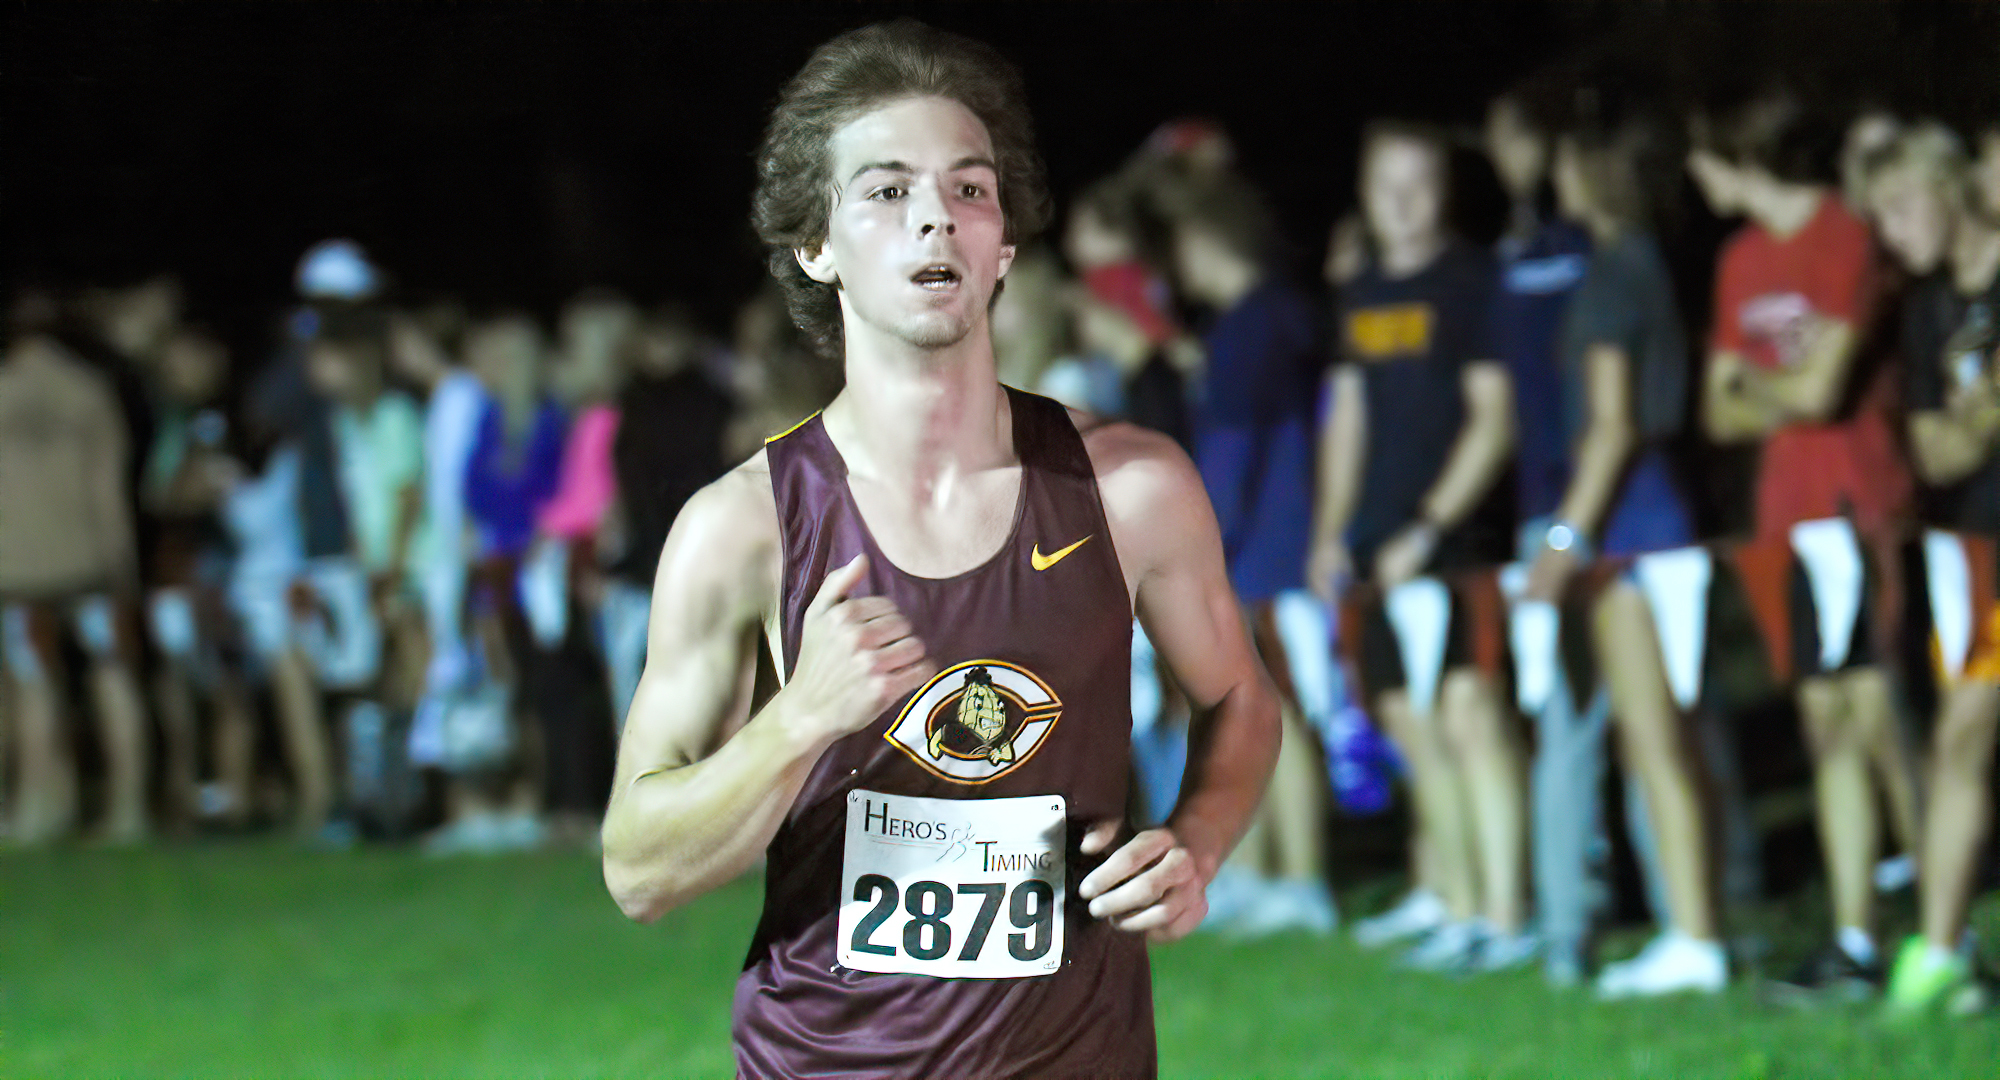 Sophomore Tanner Olson recorded a season-best time and team finish as he was the No.2 finisher for the Cobbers at the Jim Drews Invite.